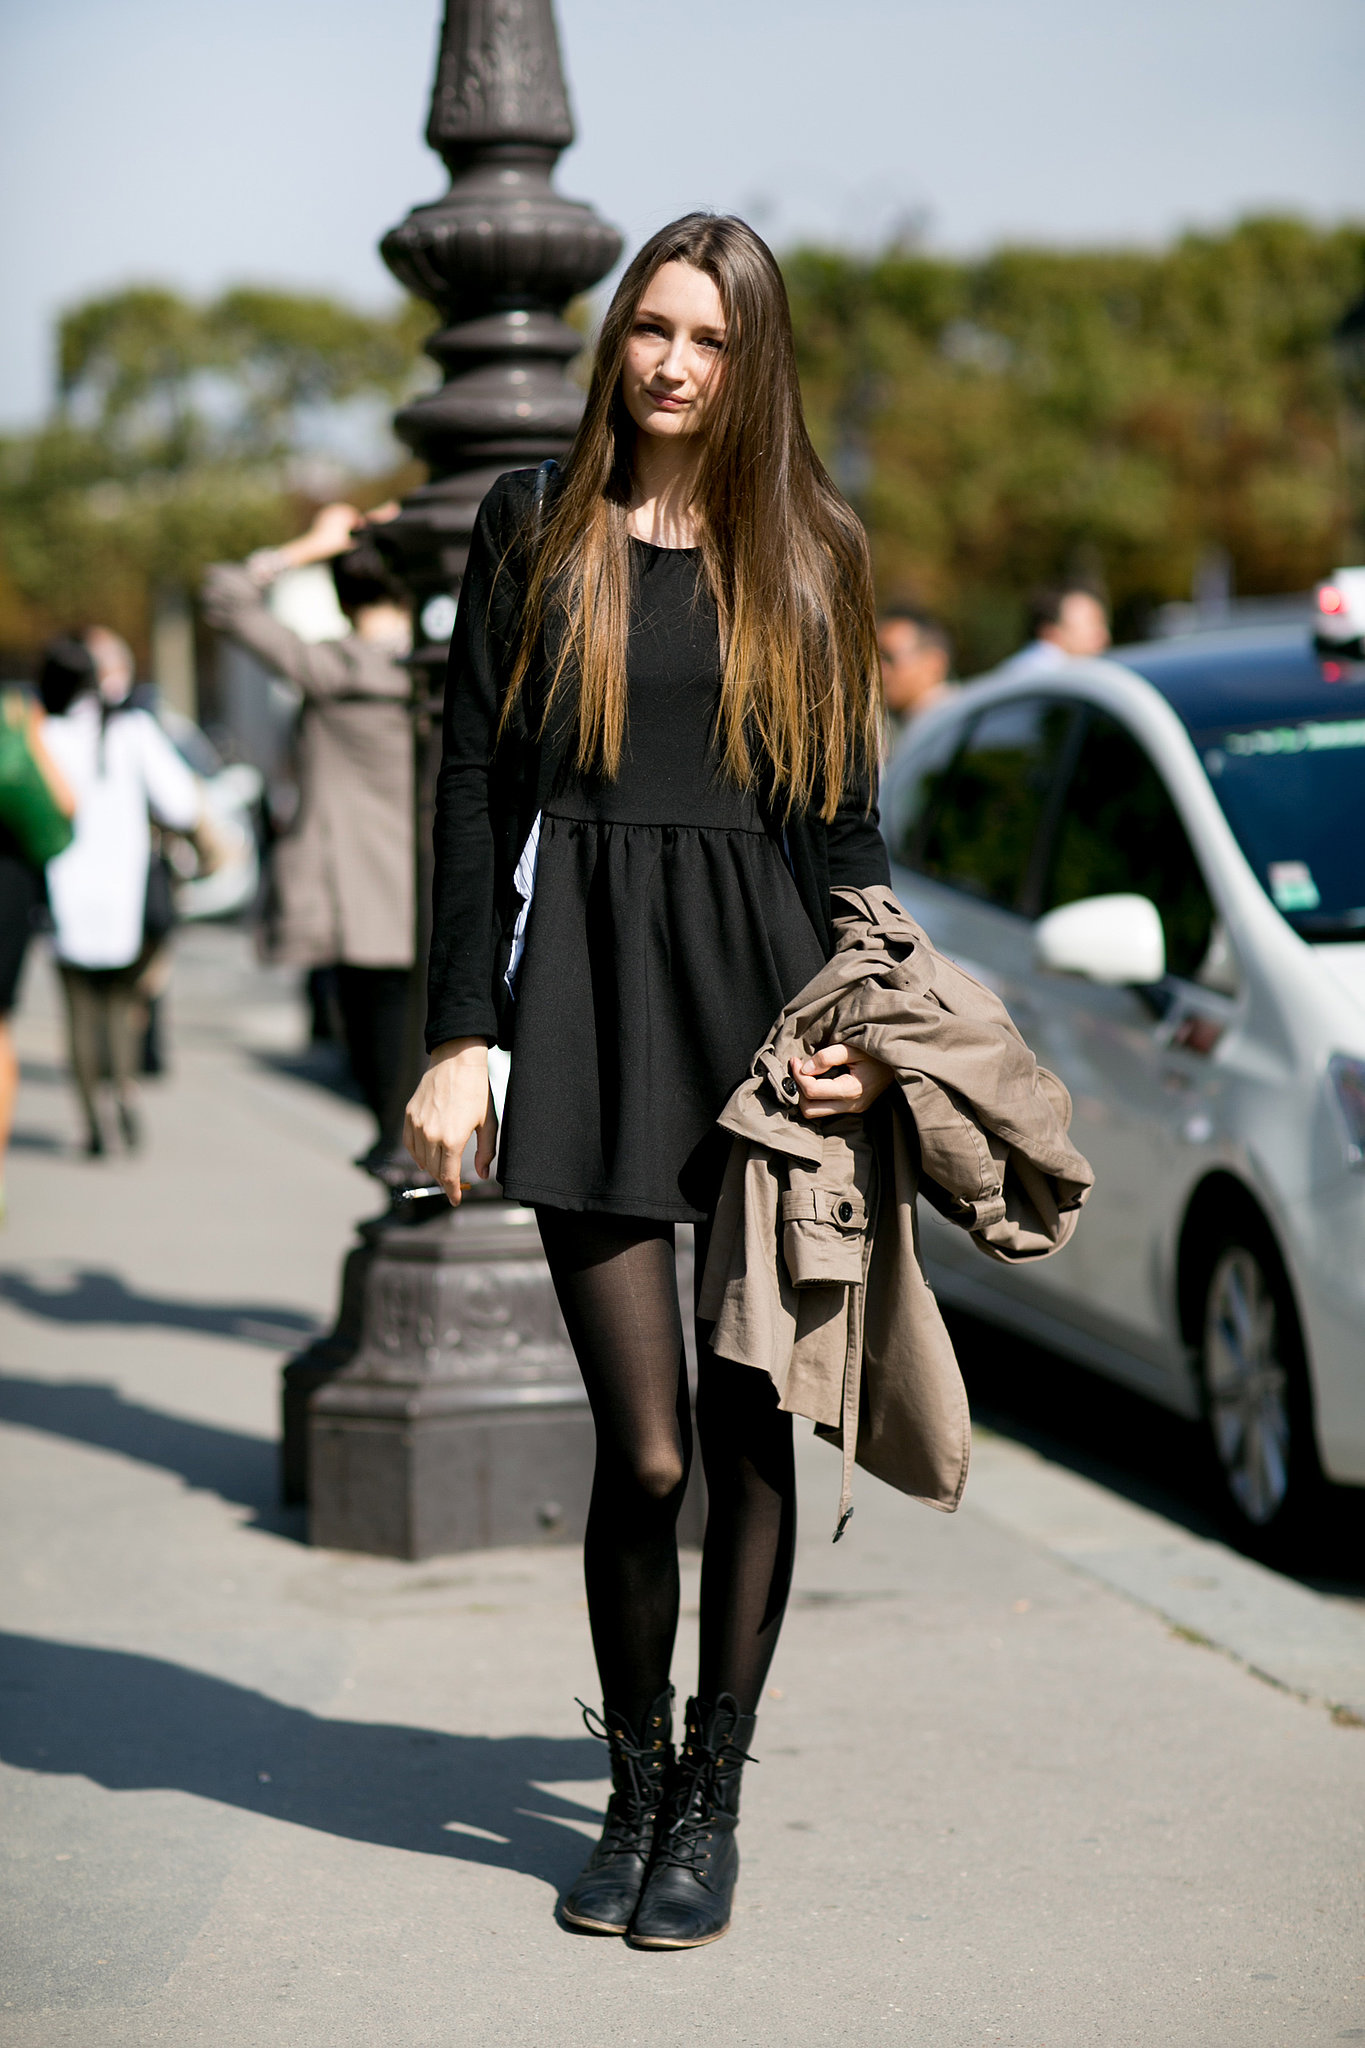 The little black dress, executed with little black boots